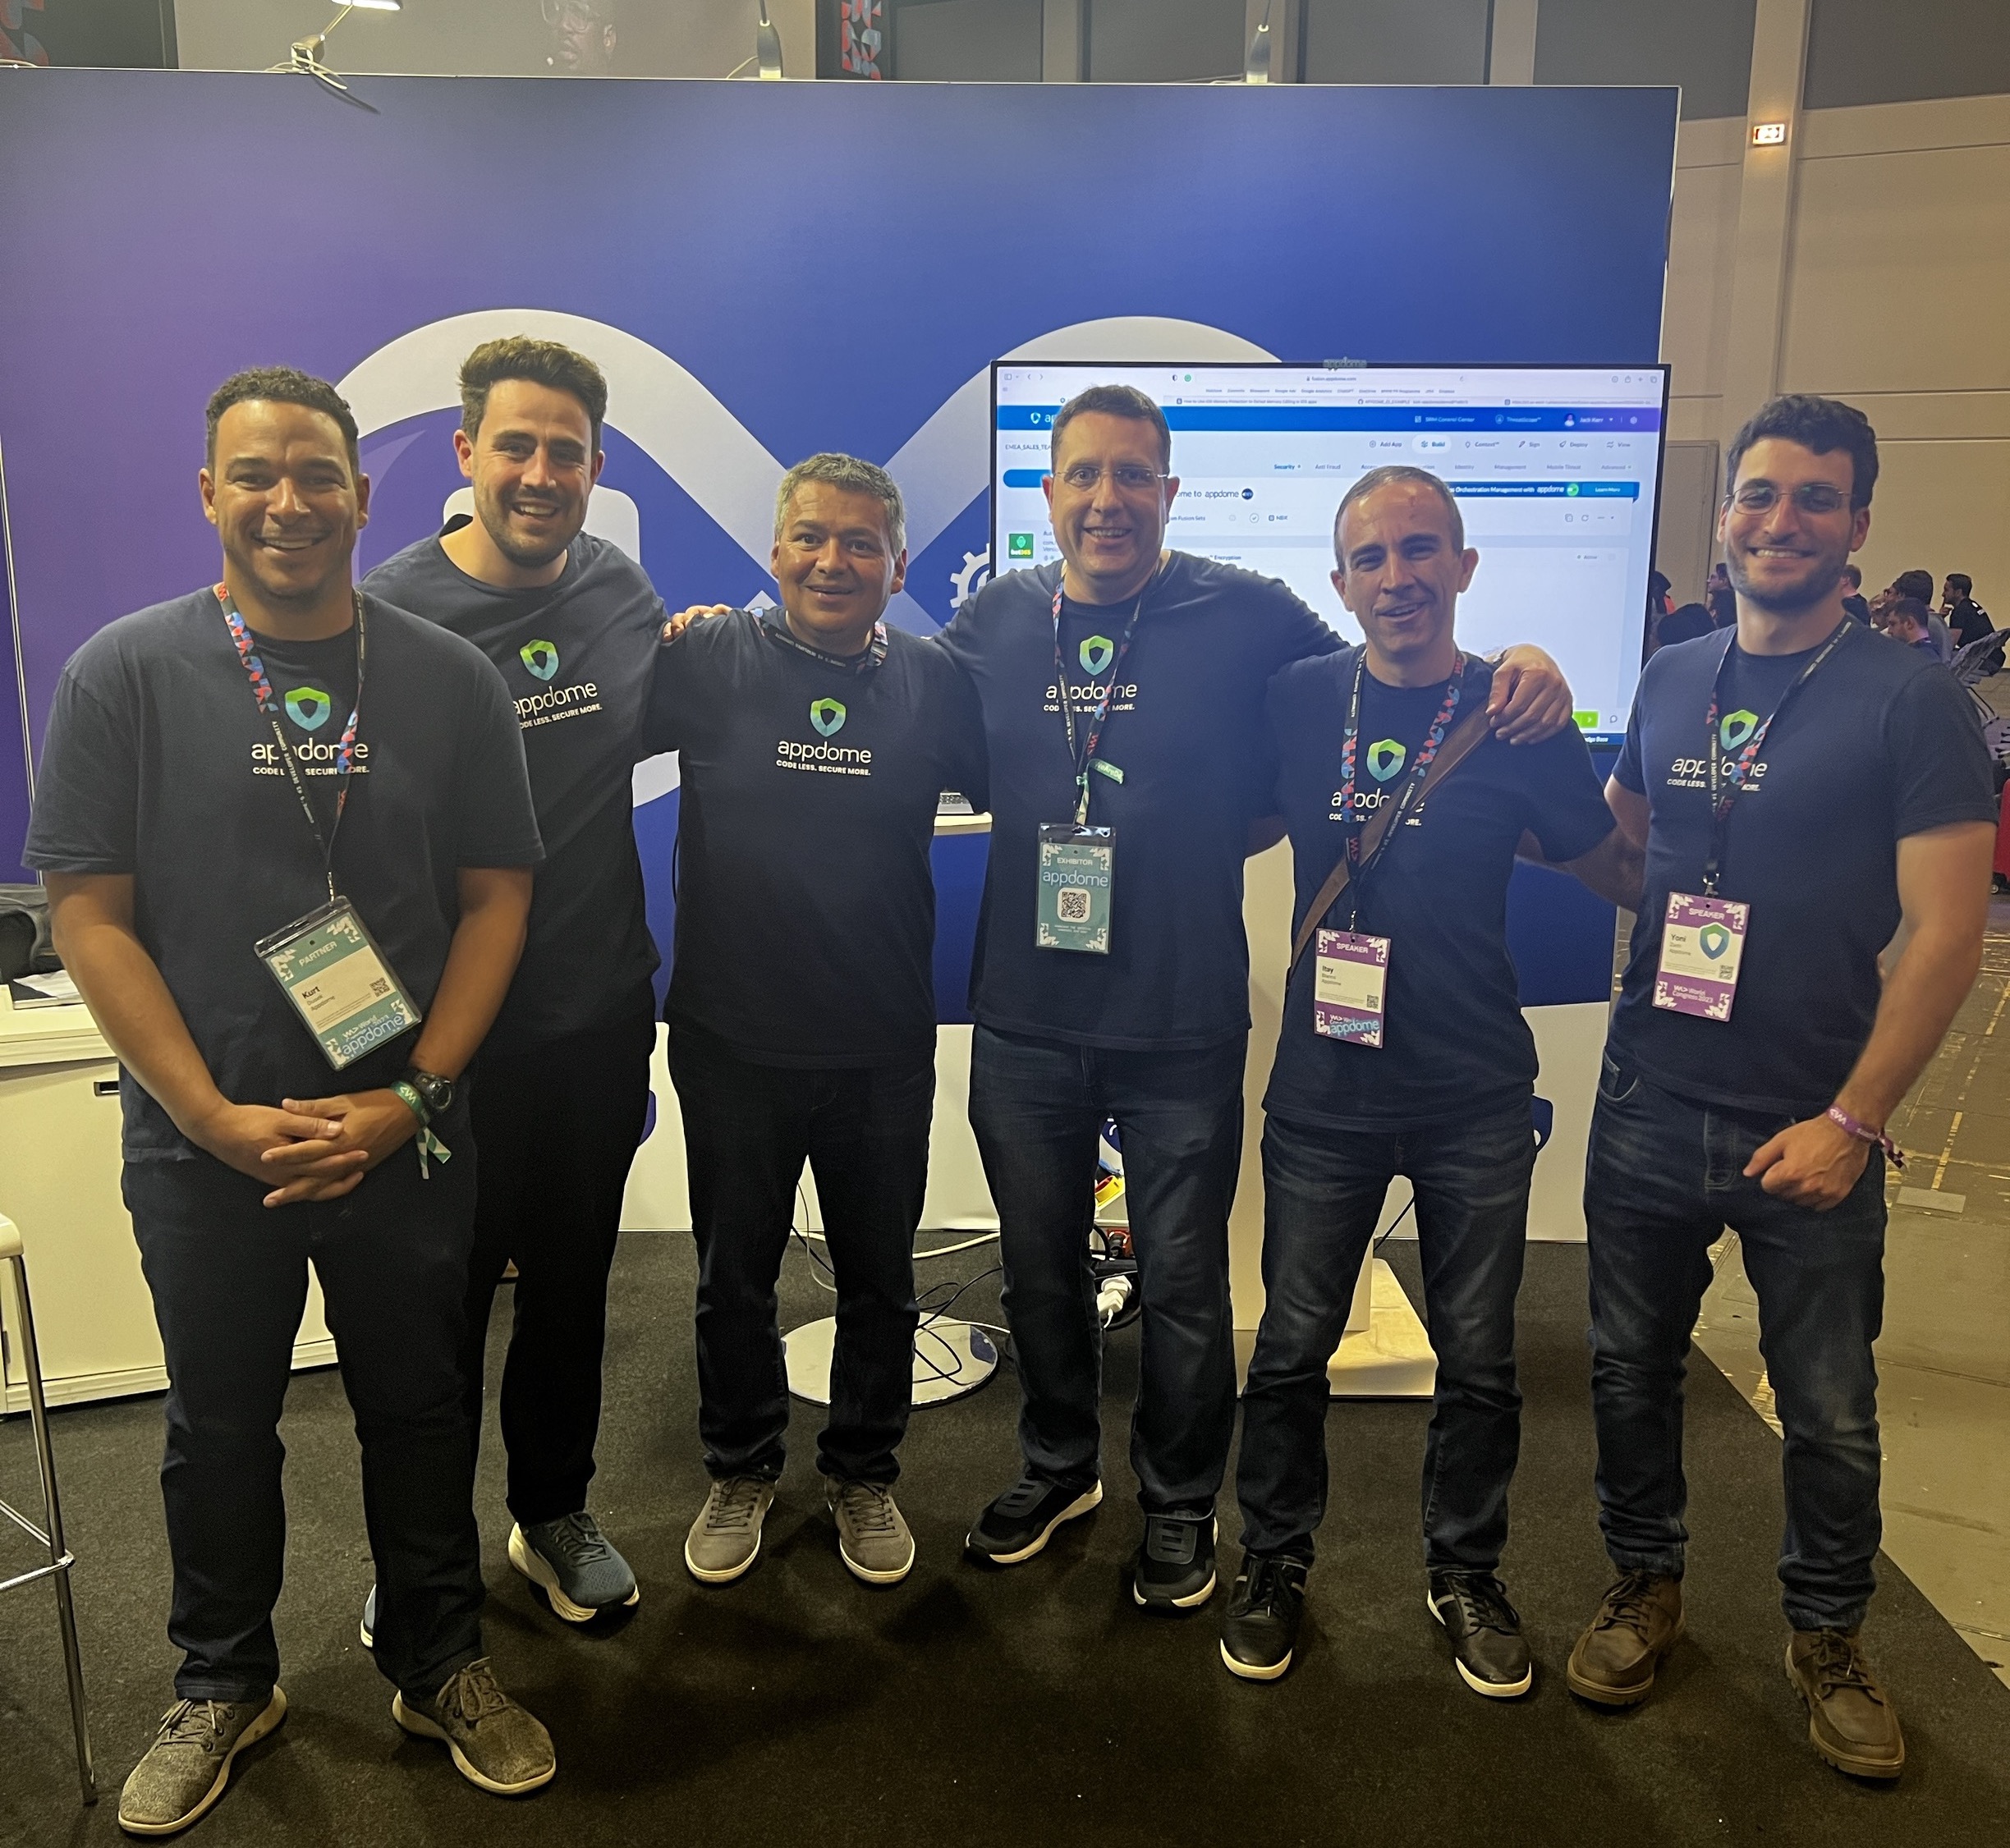 Appdome team at the booth